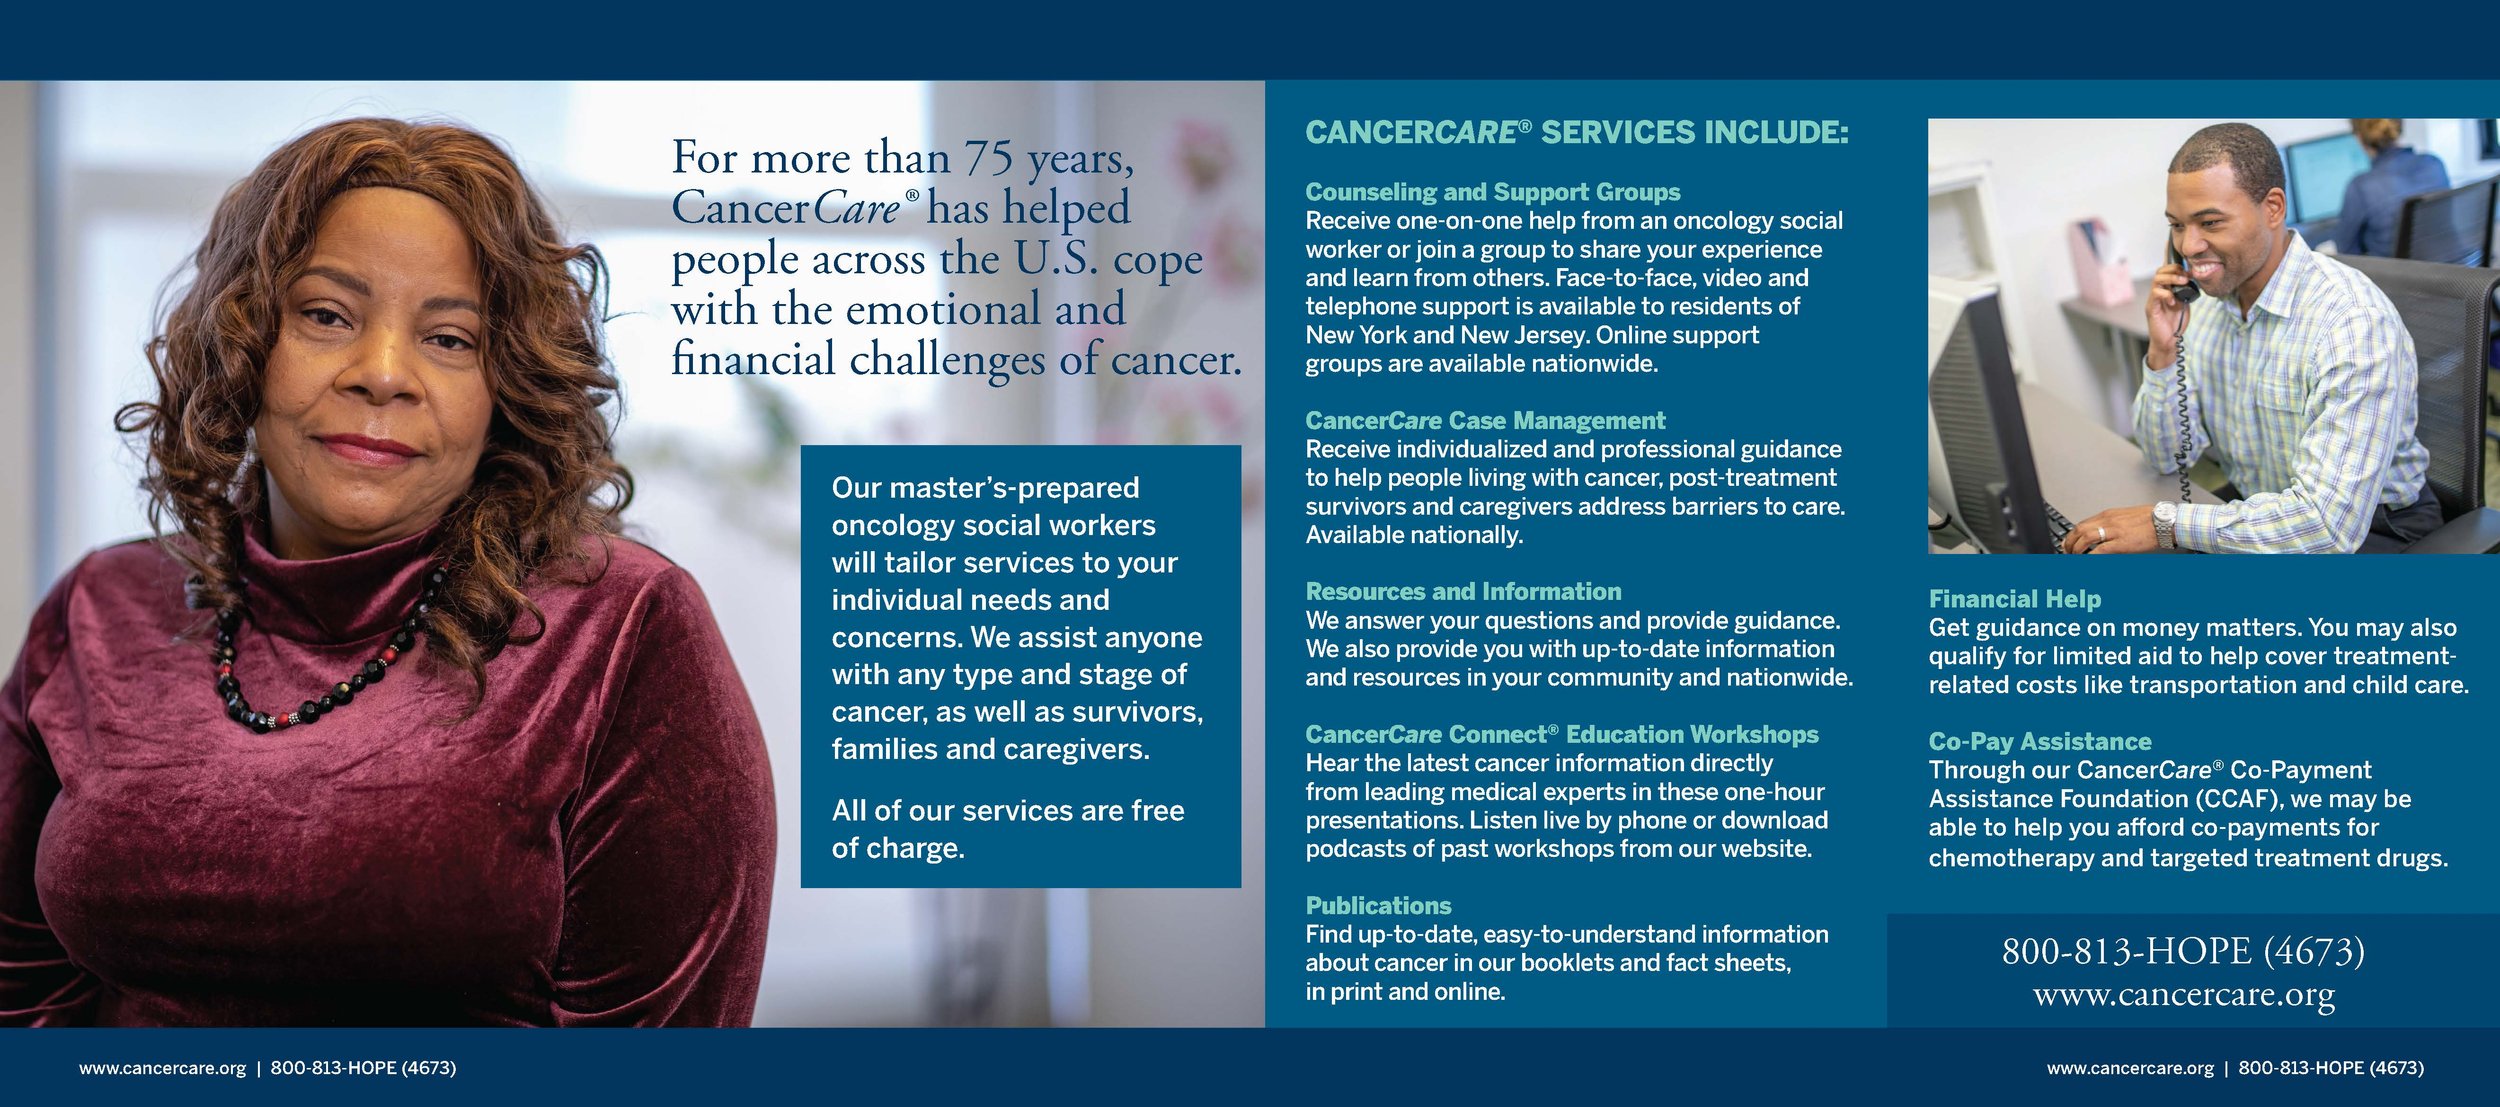 CancerCare General Brochure_Page_2.jpg